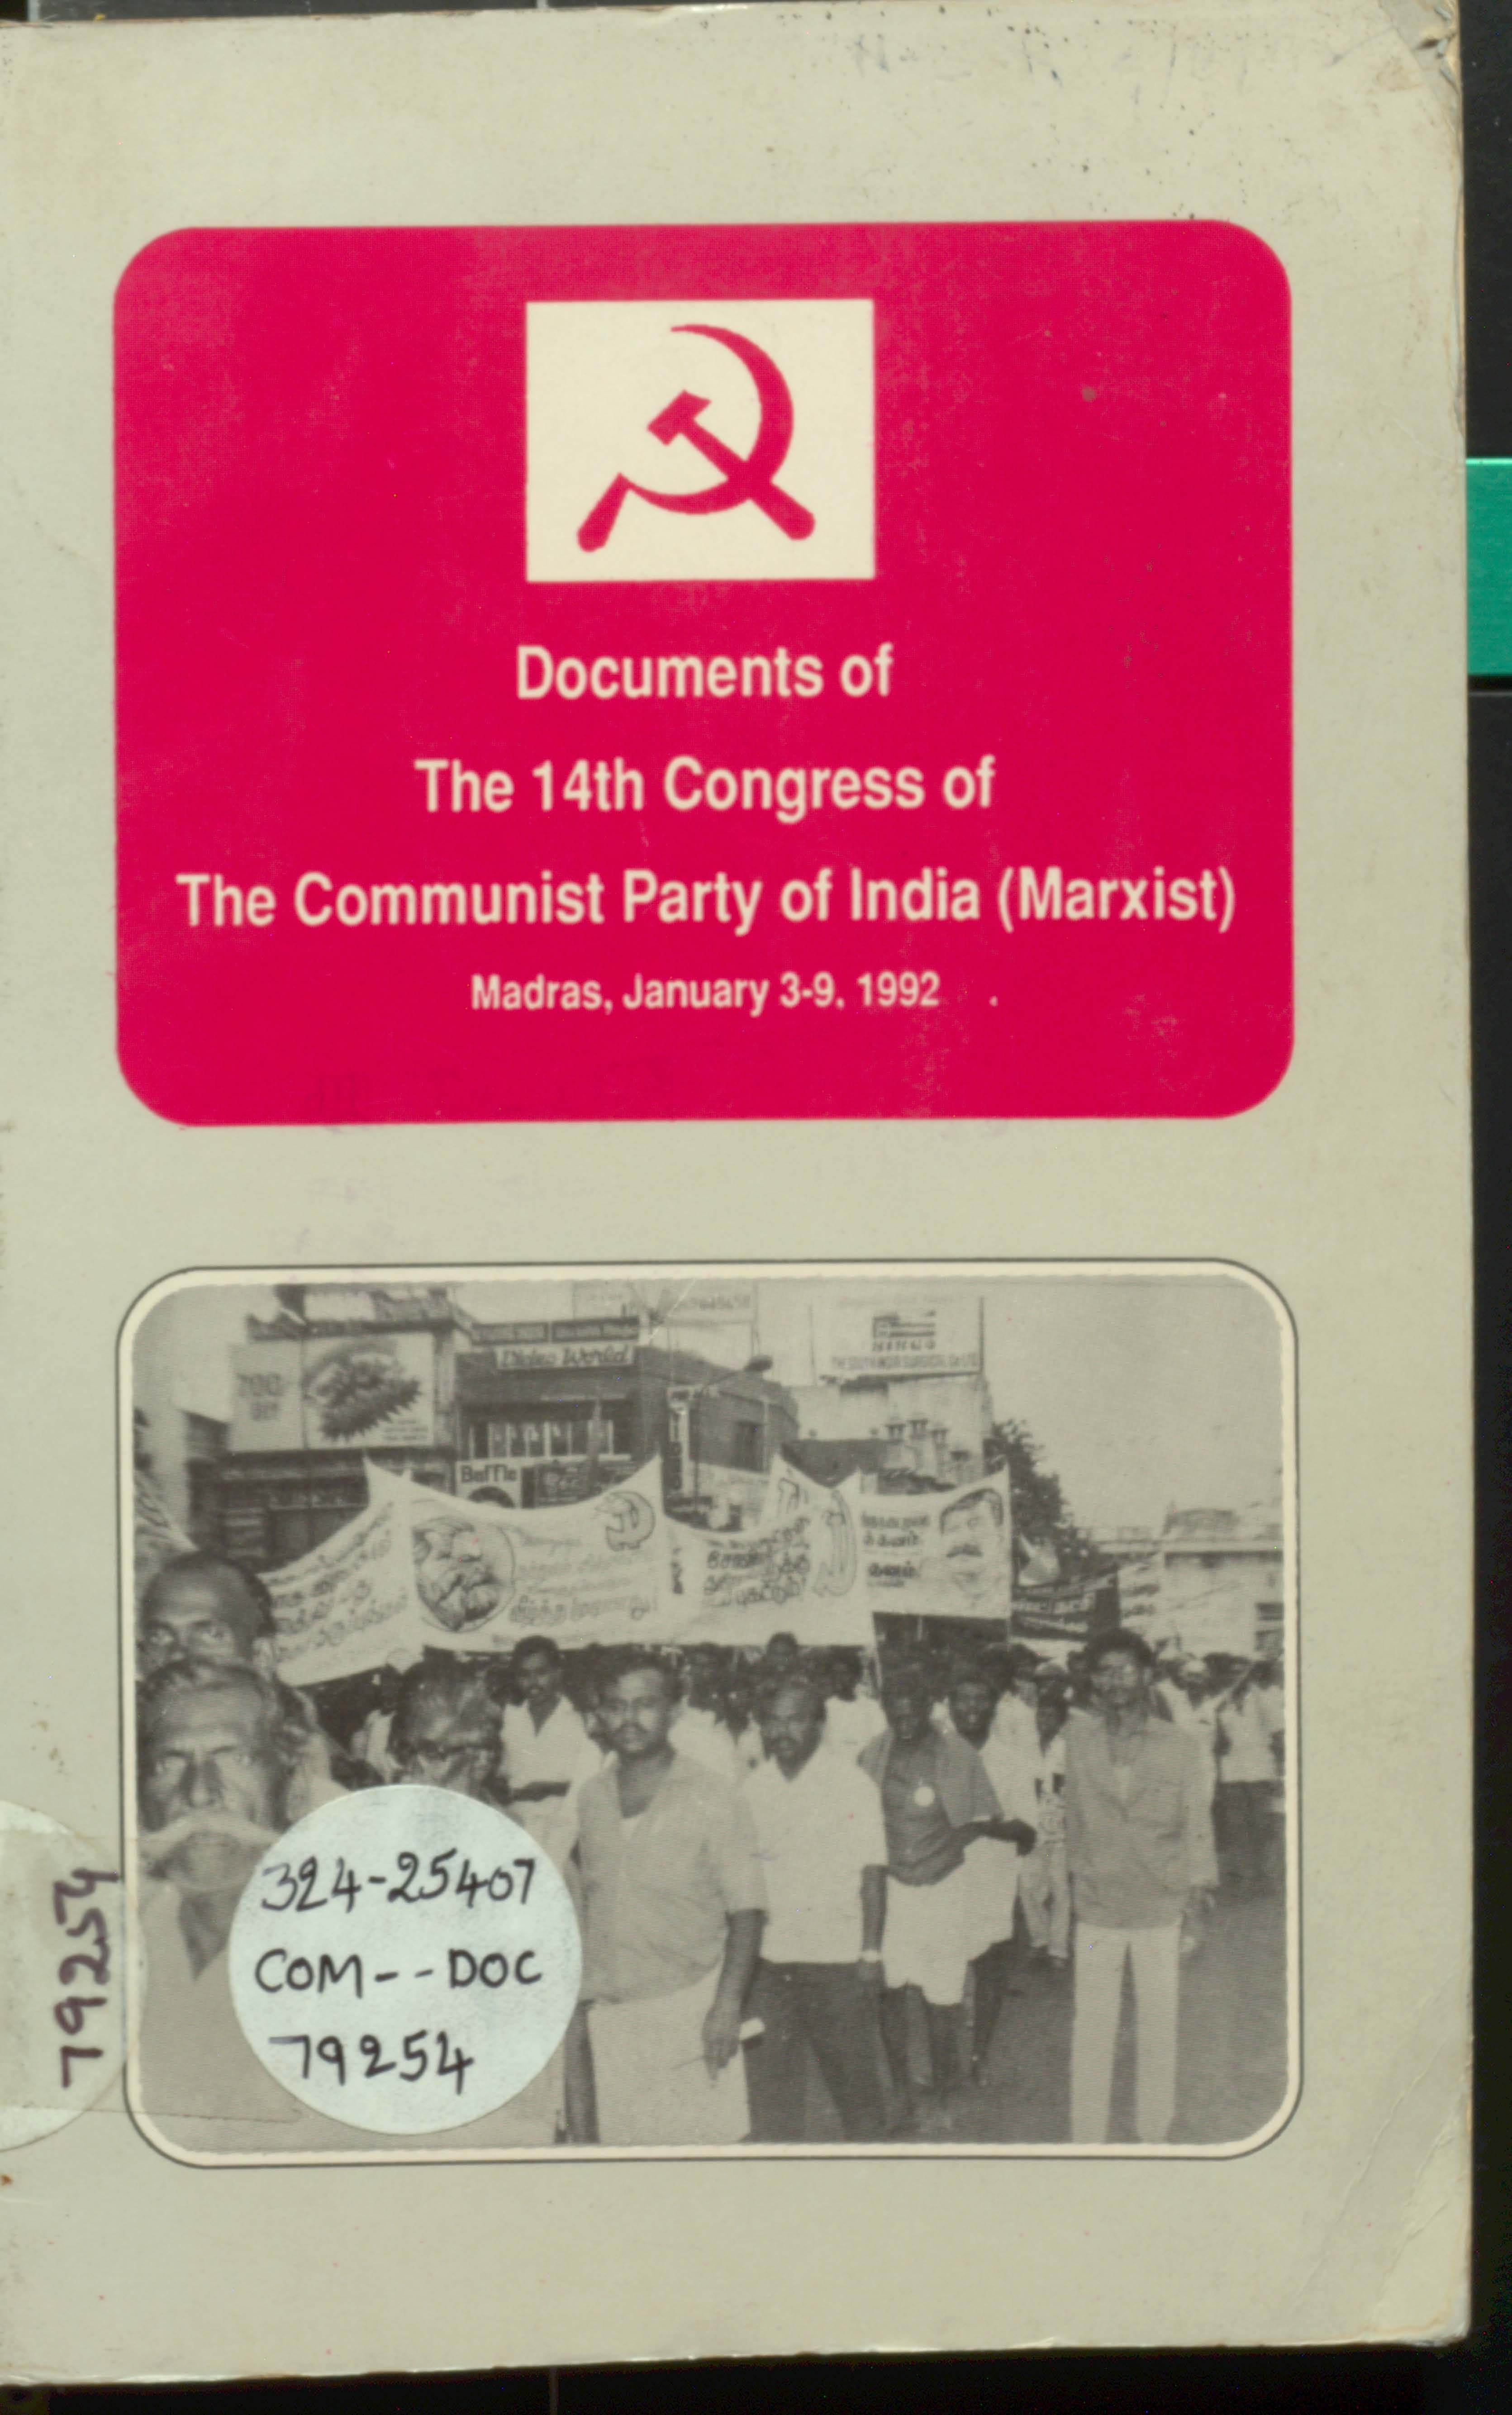 Docments of the14th congress of the communist pary of india (marxist) madras,january-9,1992